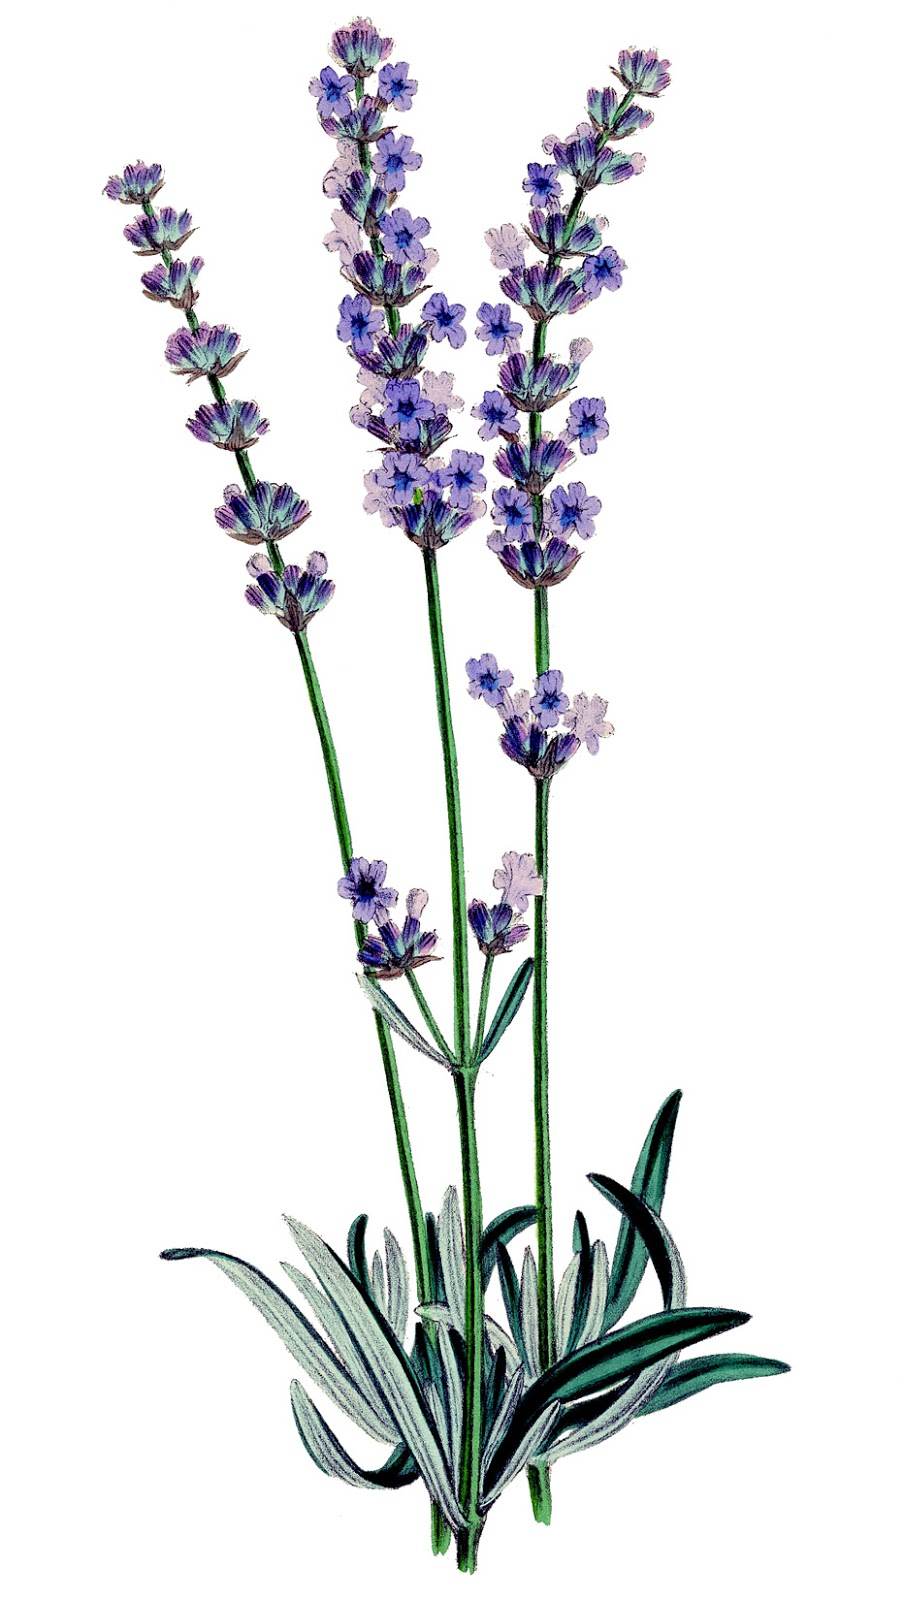 lavender clipart royalty free